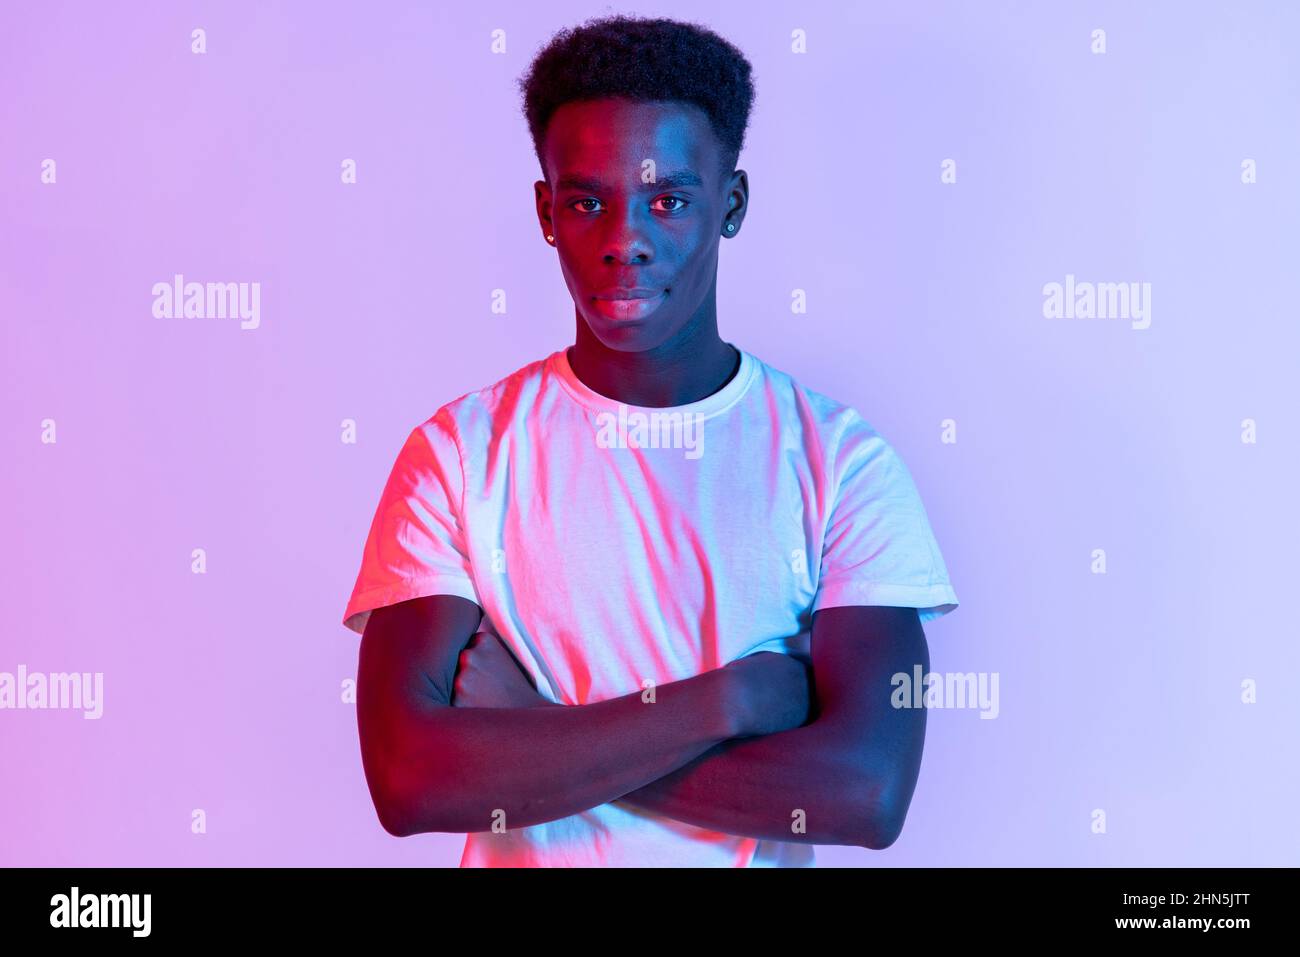 Front portrait of a black young man with folded arms, standing in white t-shirt against purple and red lit background Stock Photo